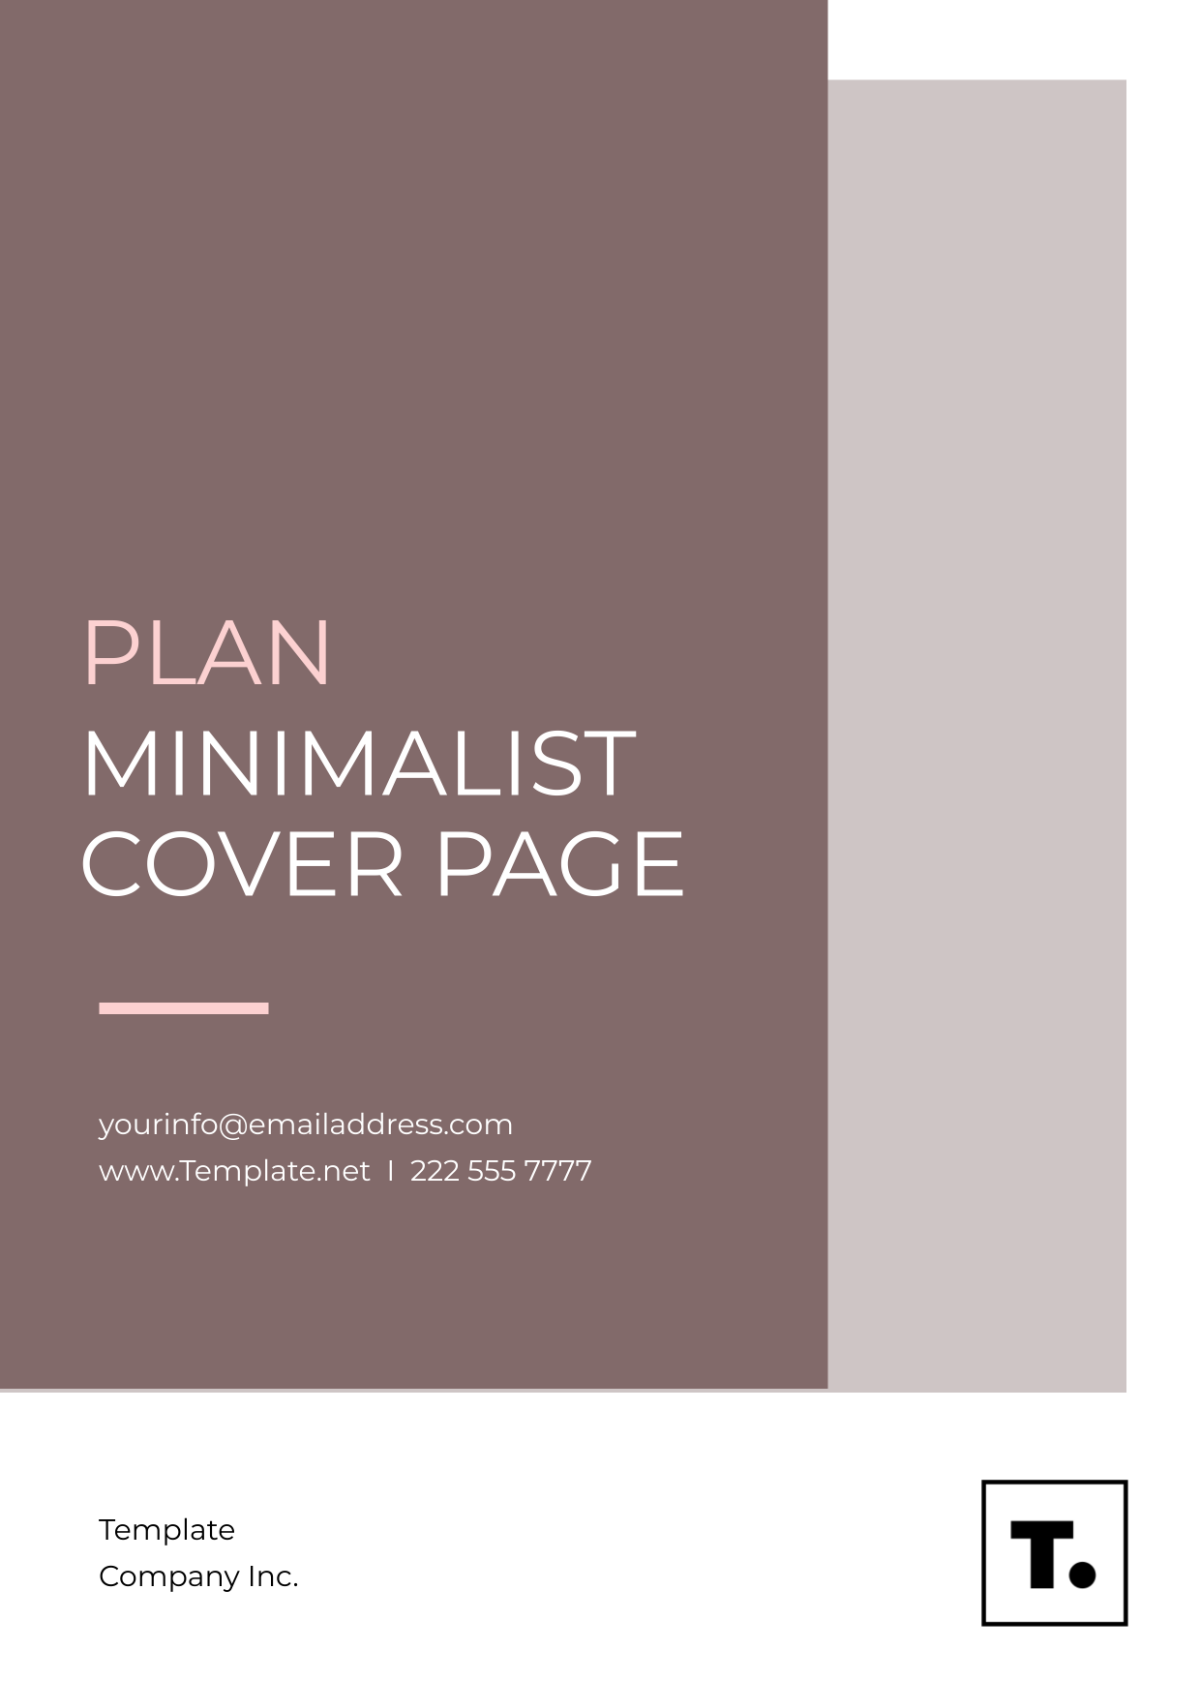 Plan Minimalist Cover Page Template